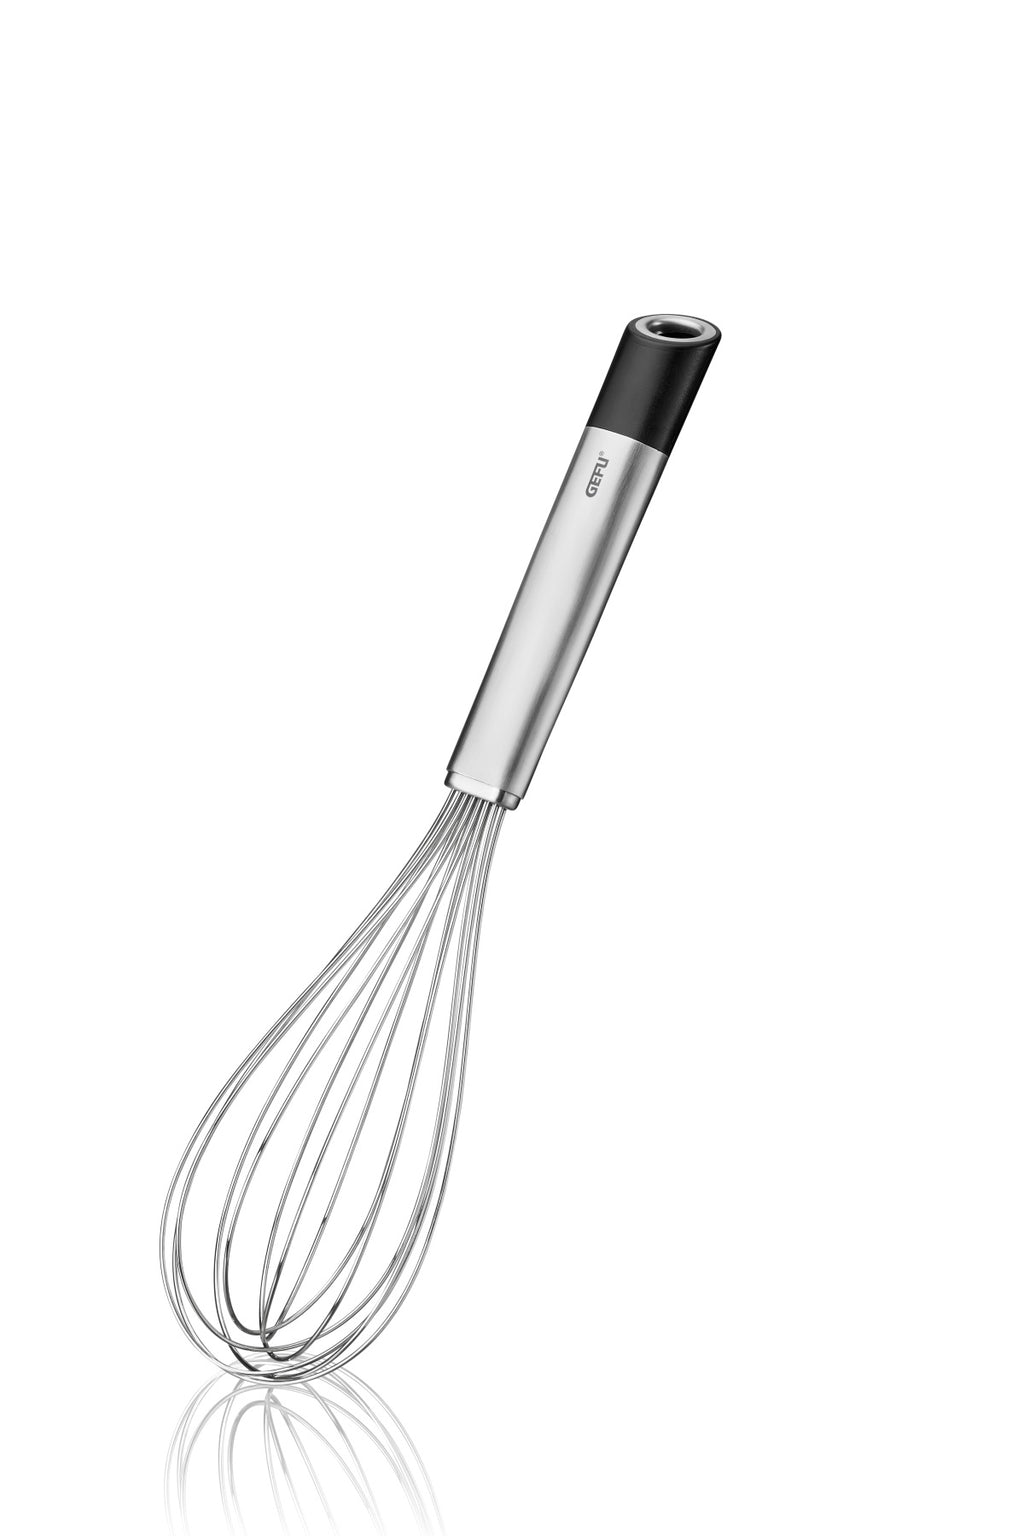 Rösle Uniquely-Shaped Gourmet Whisk, 11 in. - Robust Loops and Beveled Shape